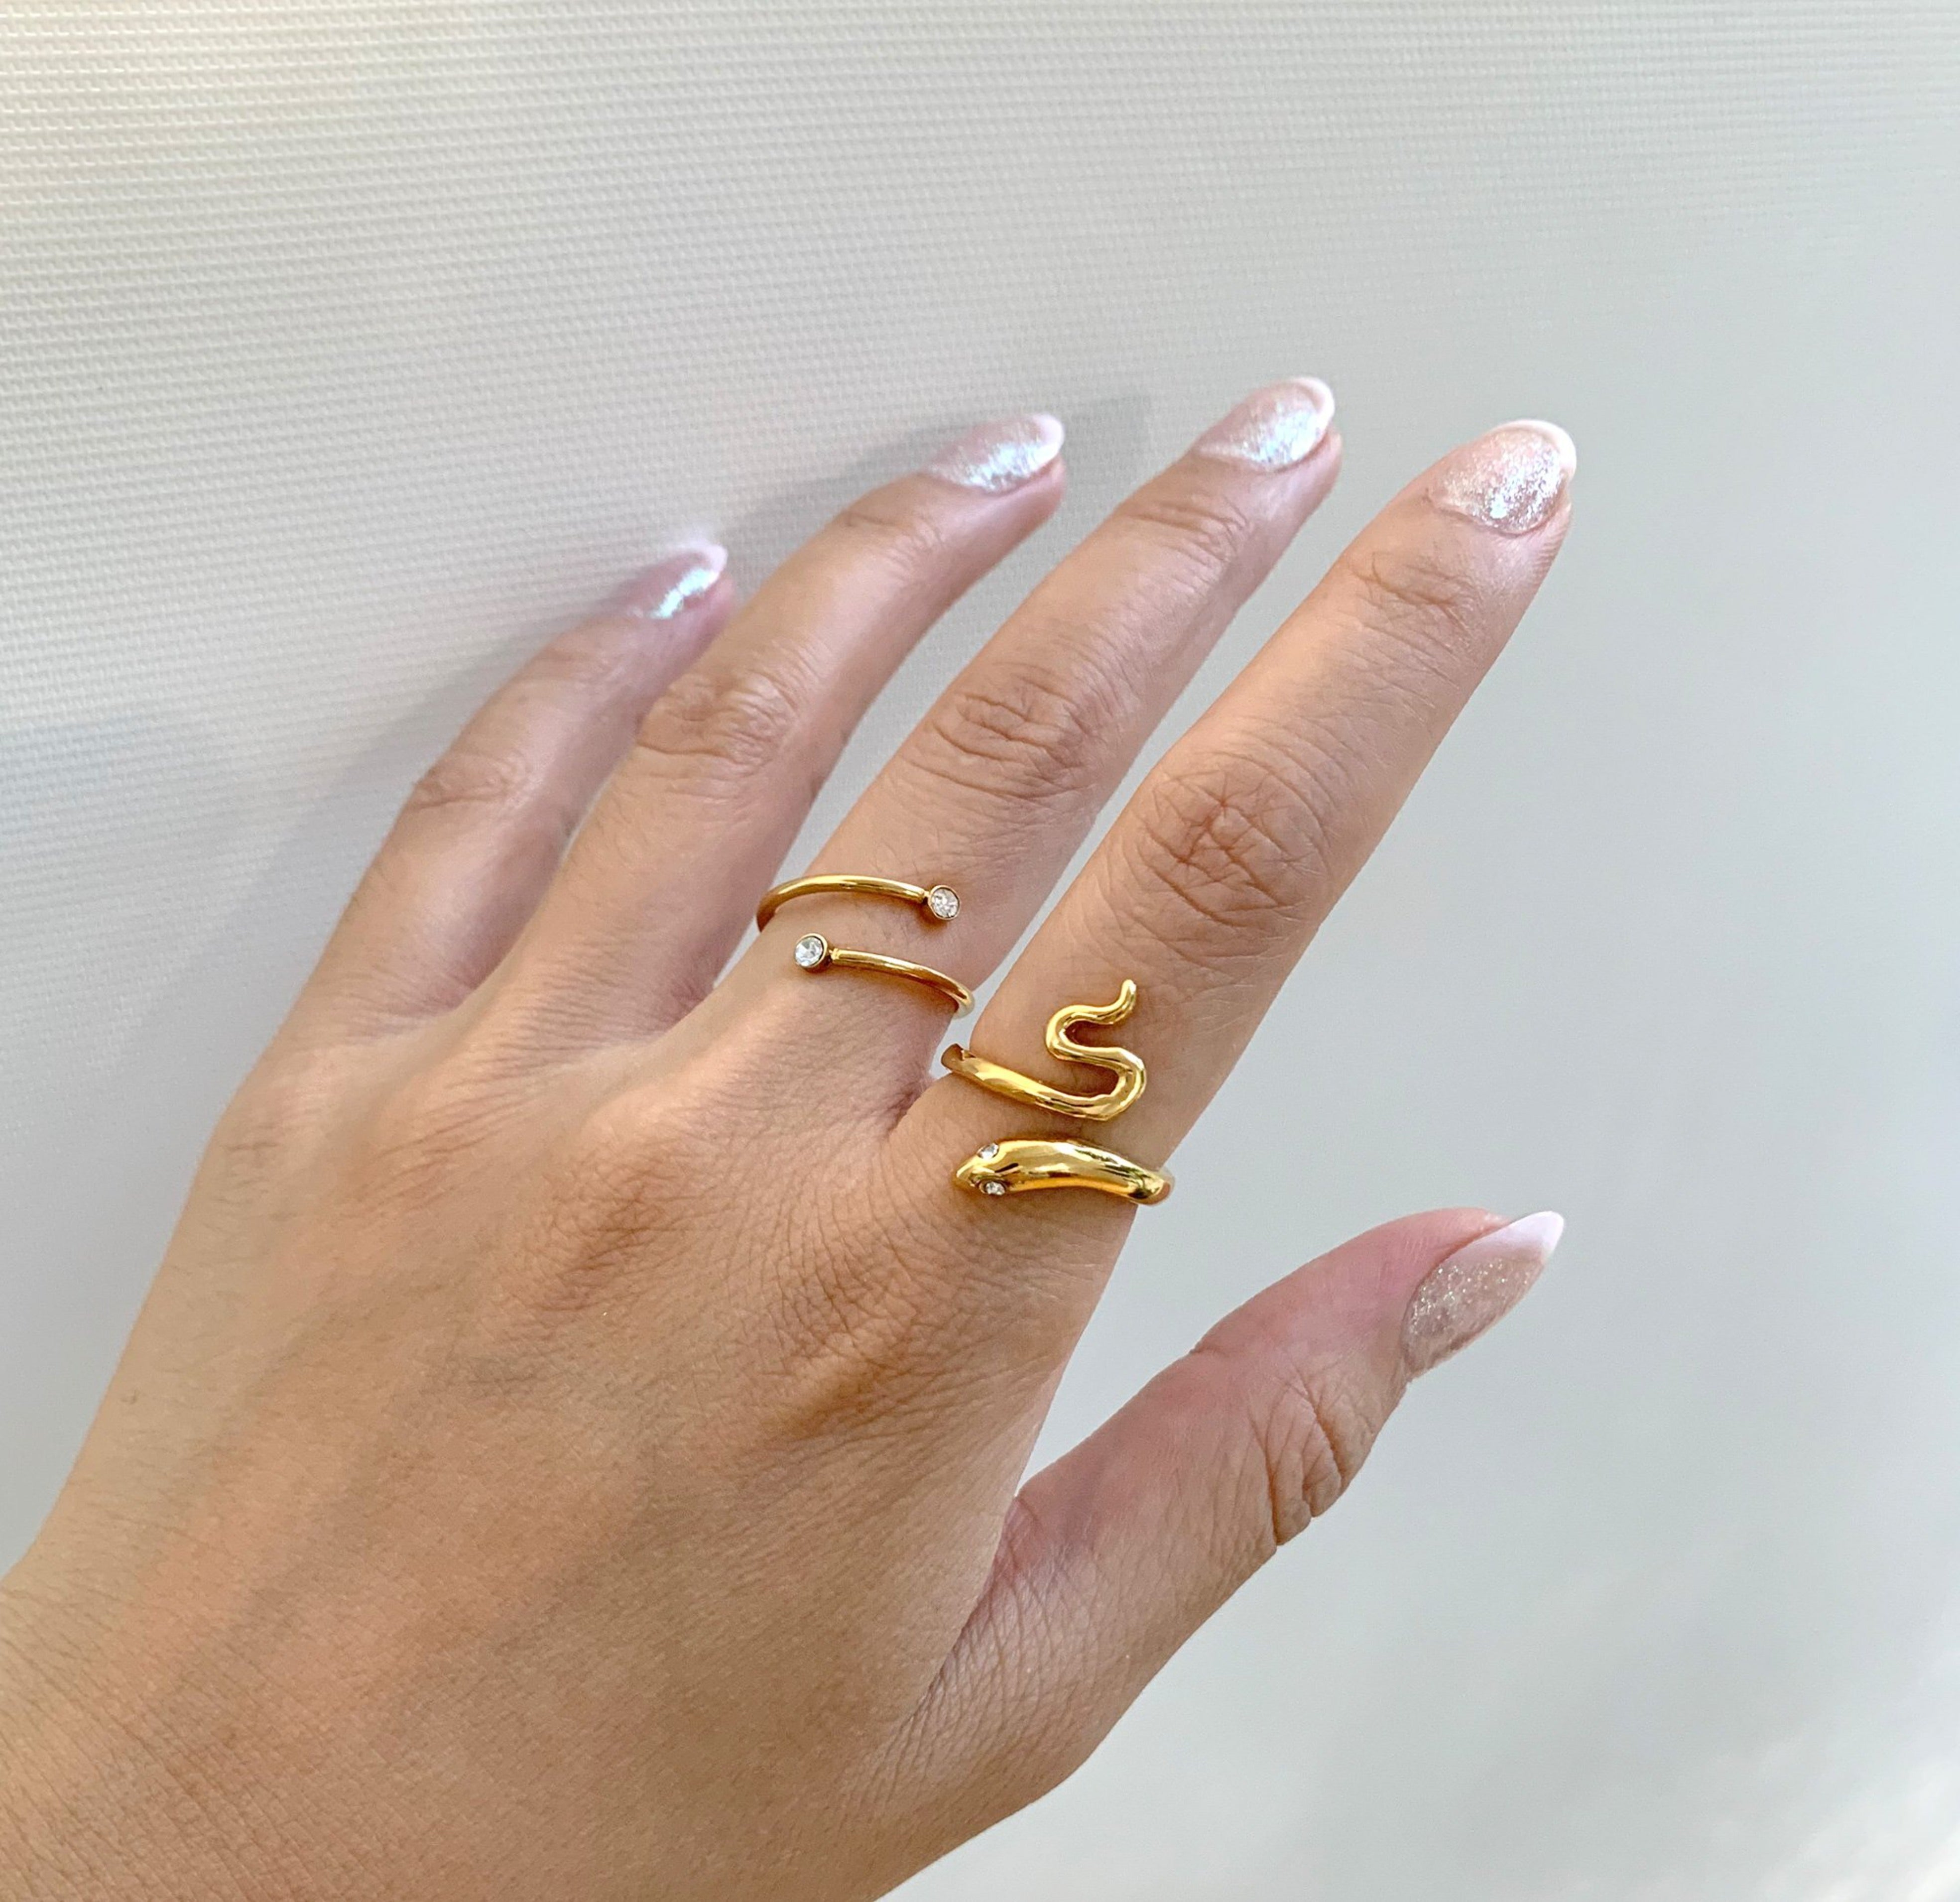 gold snake ring paired with Sylvie spiral gold ring. Waterproof jewelry